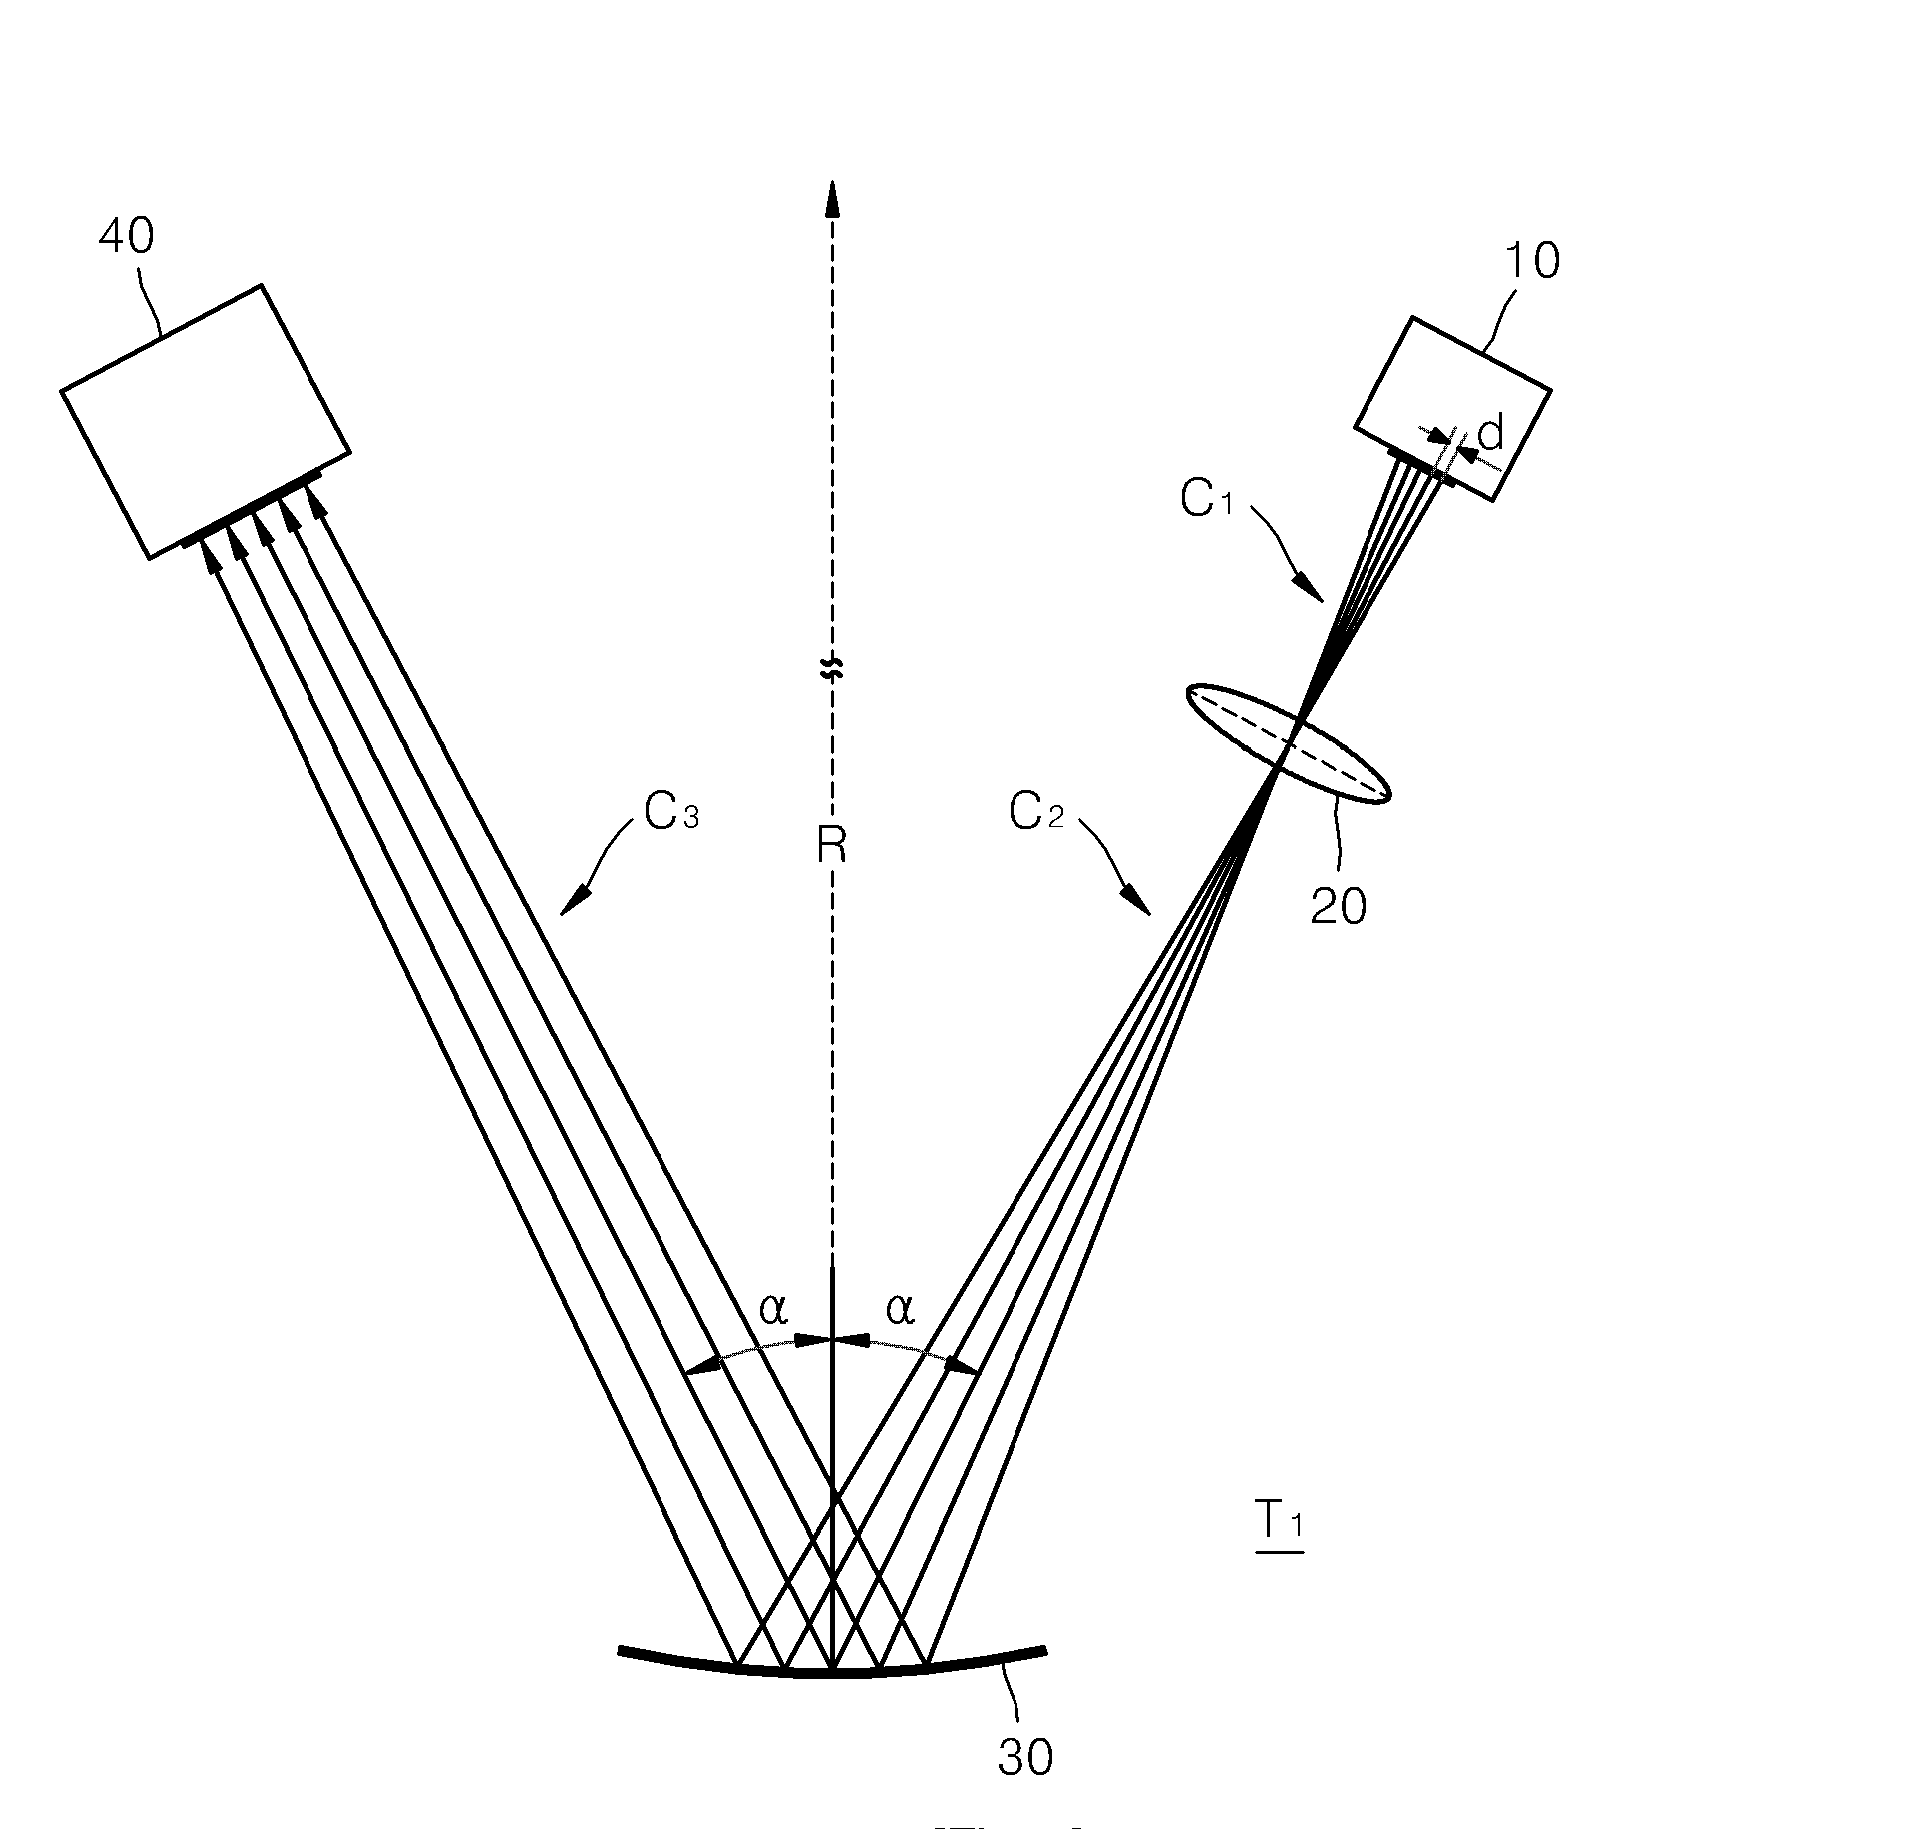 Apparatus and Method for Measuring Curvature Using Multiple Beams